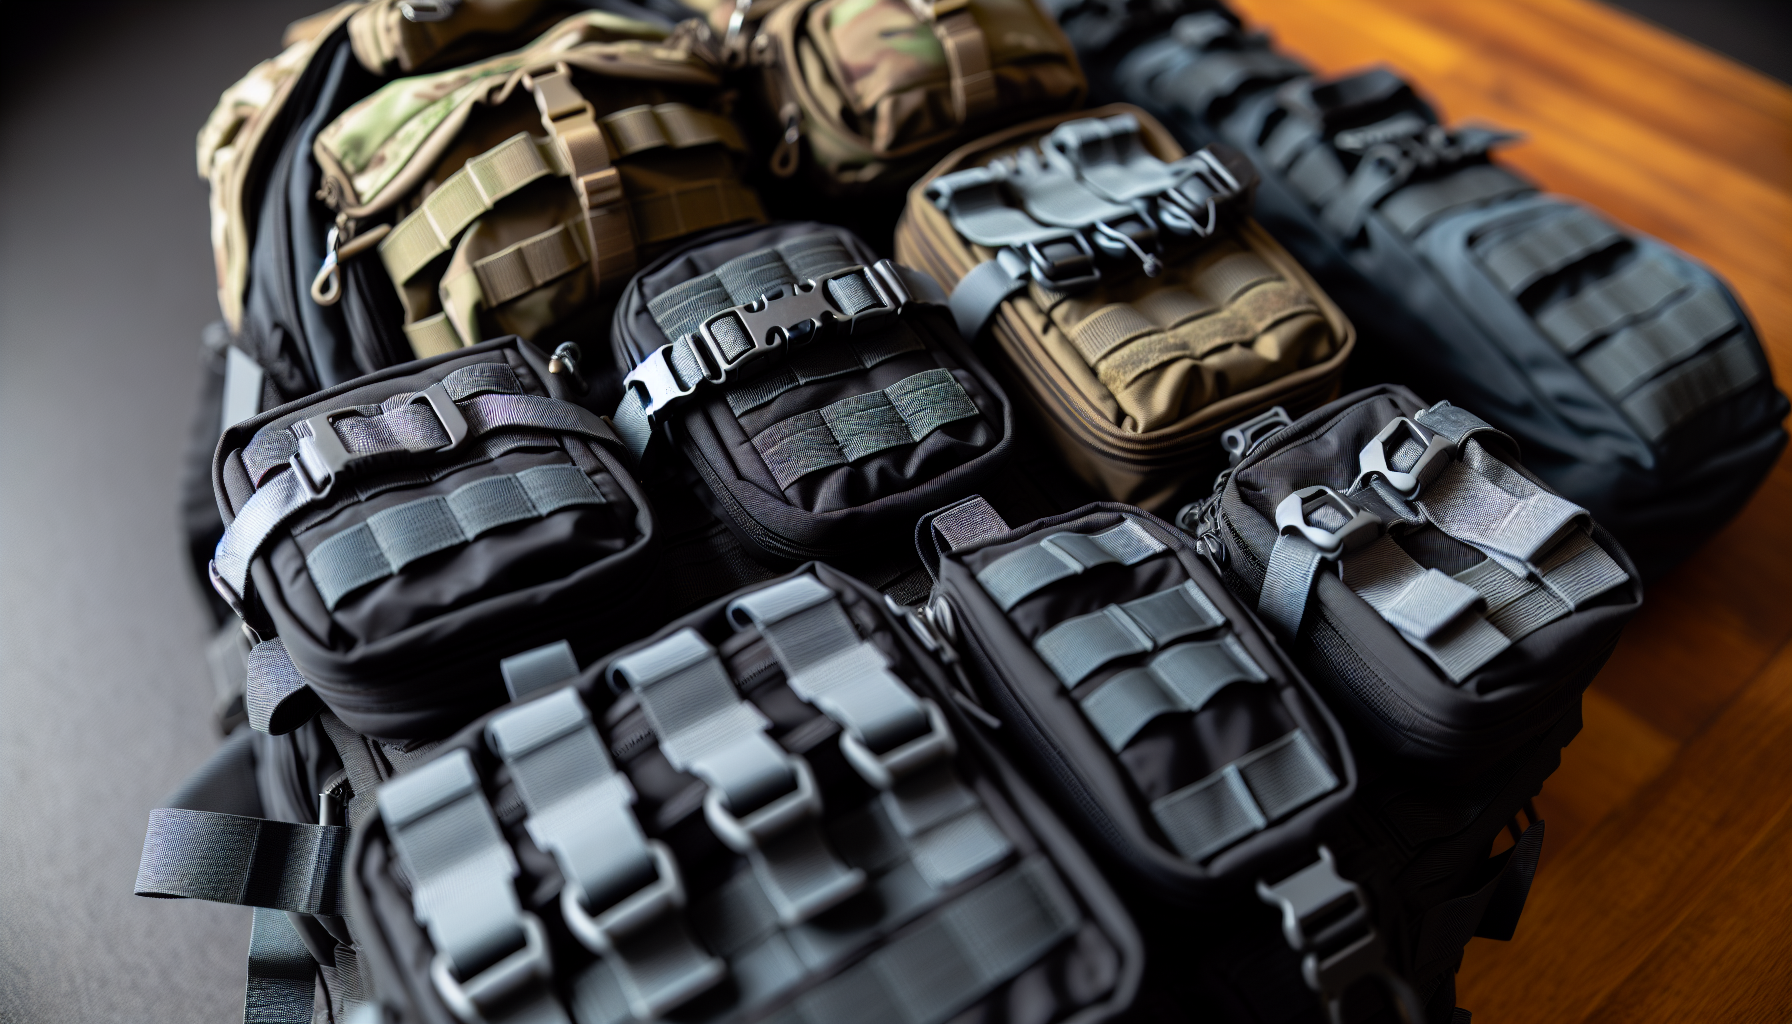 Modular pouches attached to a tactical backpack with multiple pockets